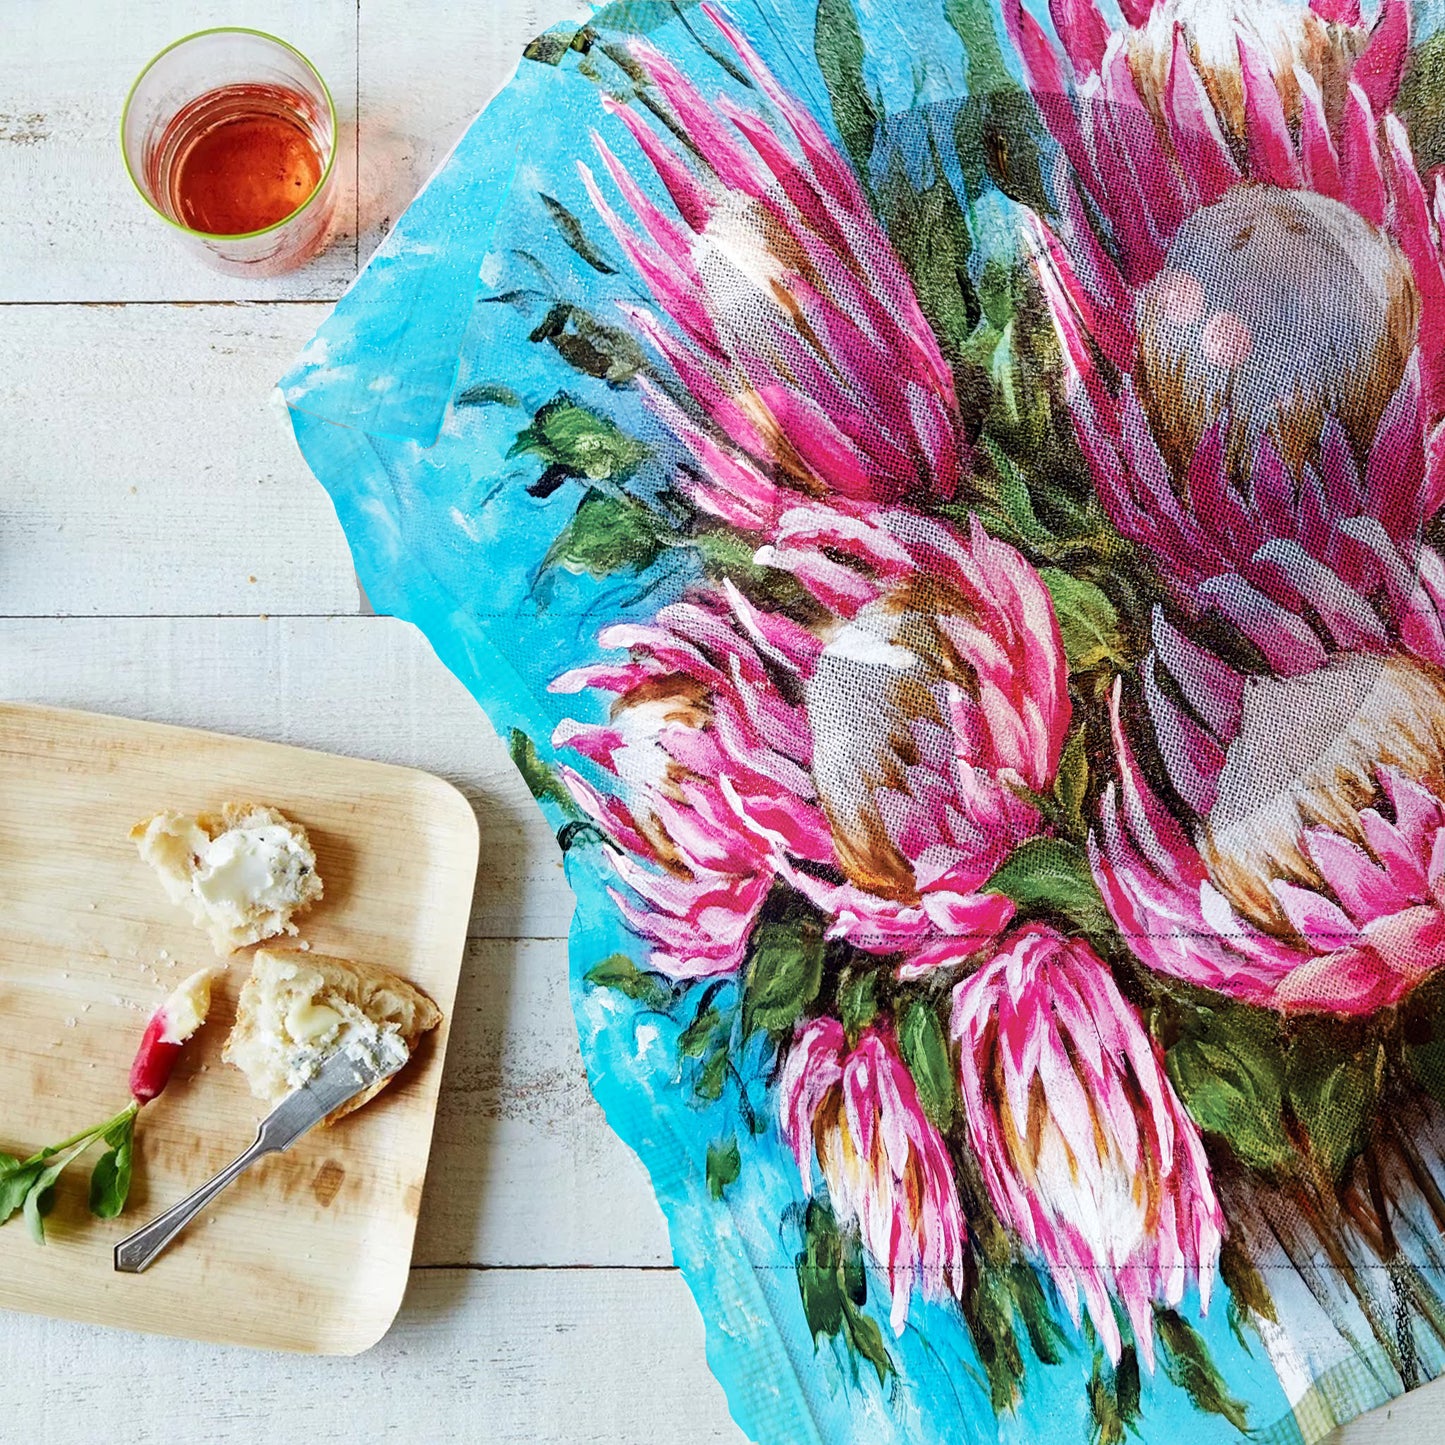 Pink Proteas on Blue Table Net Cover by Stella Bruwer